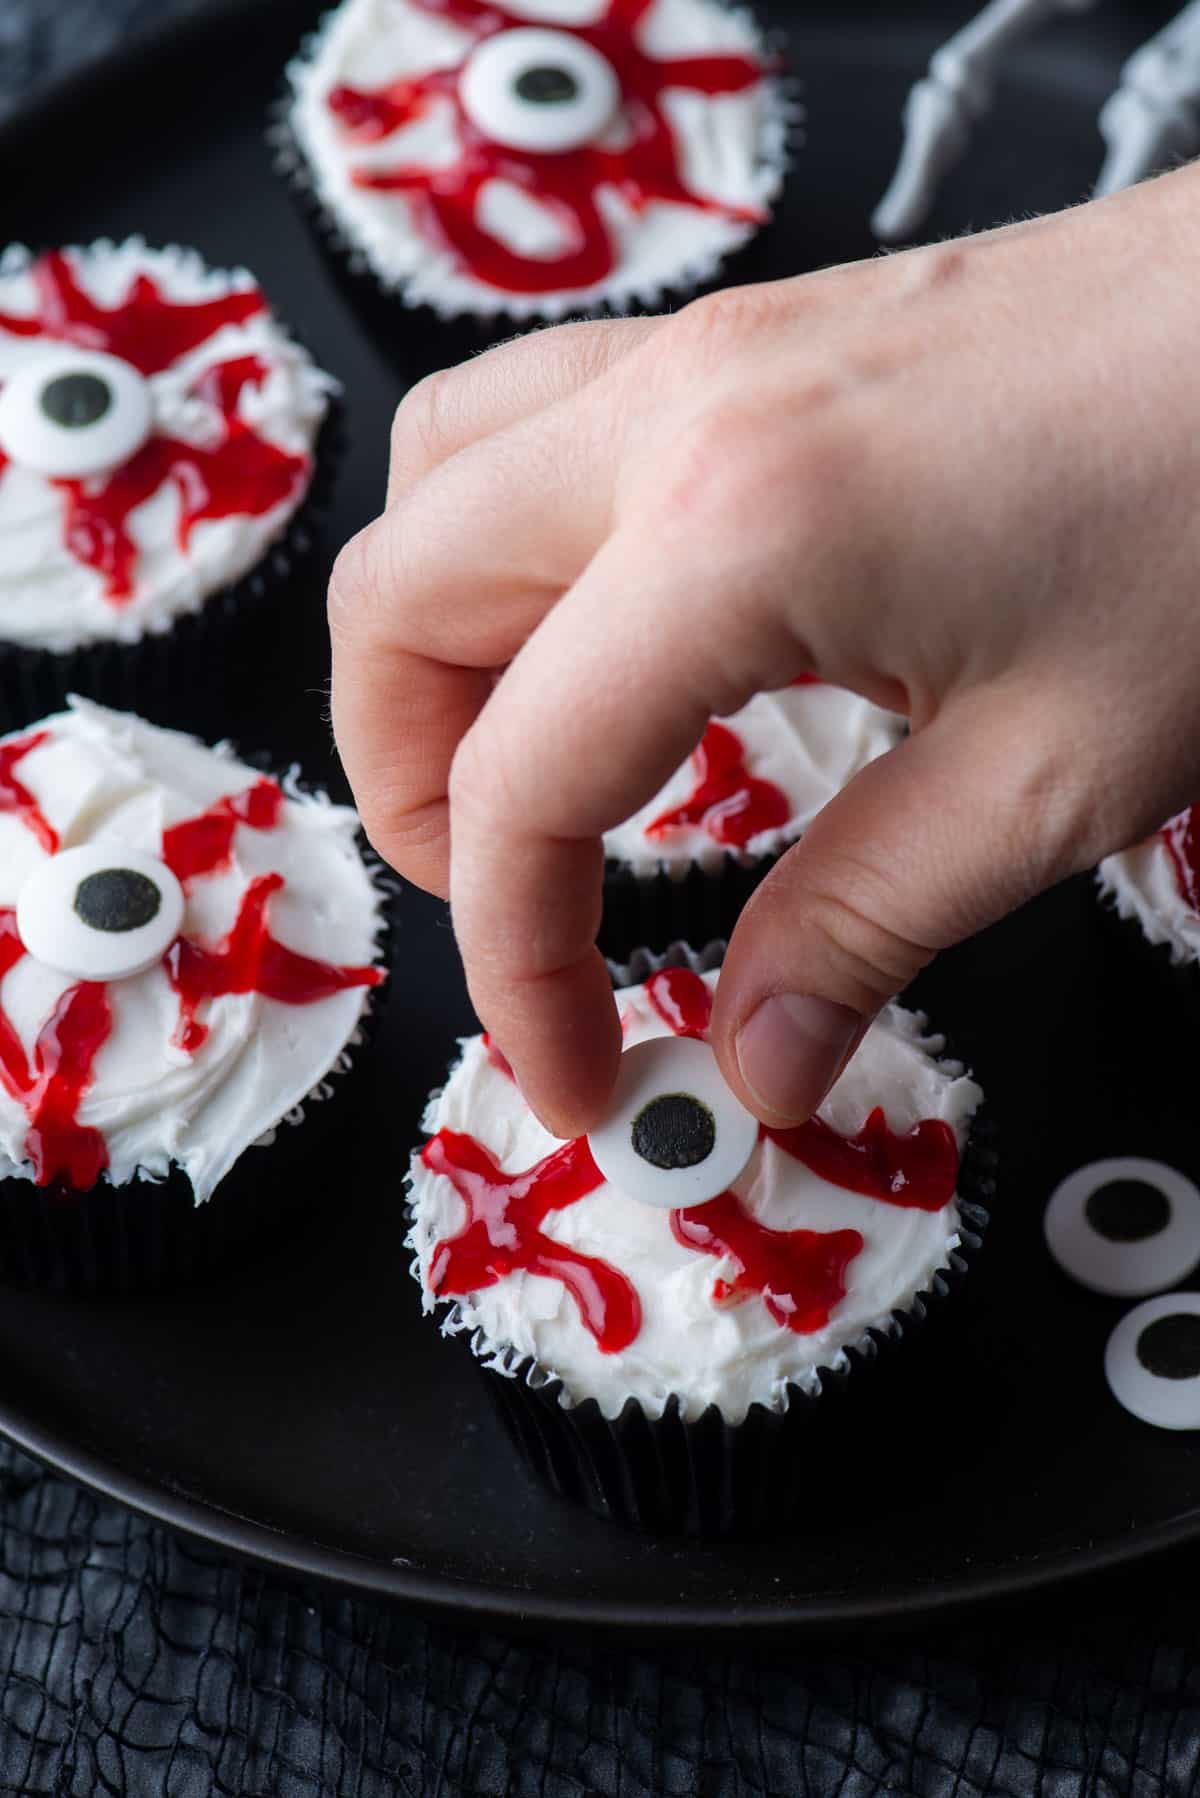 placing a candy eyeball on an eyeball cupcake with more eyeball cupcakes completed around it